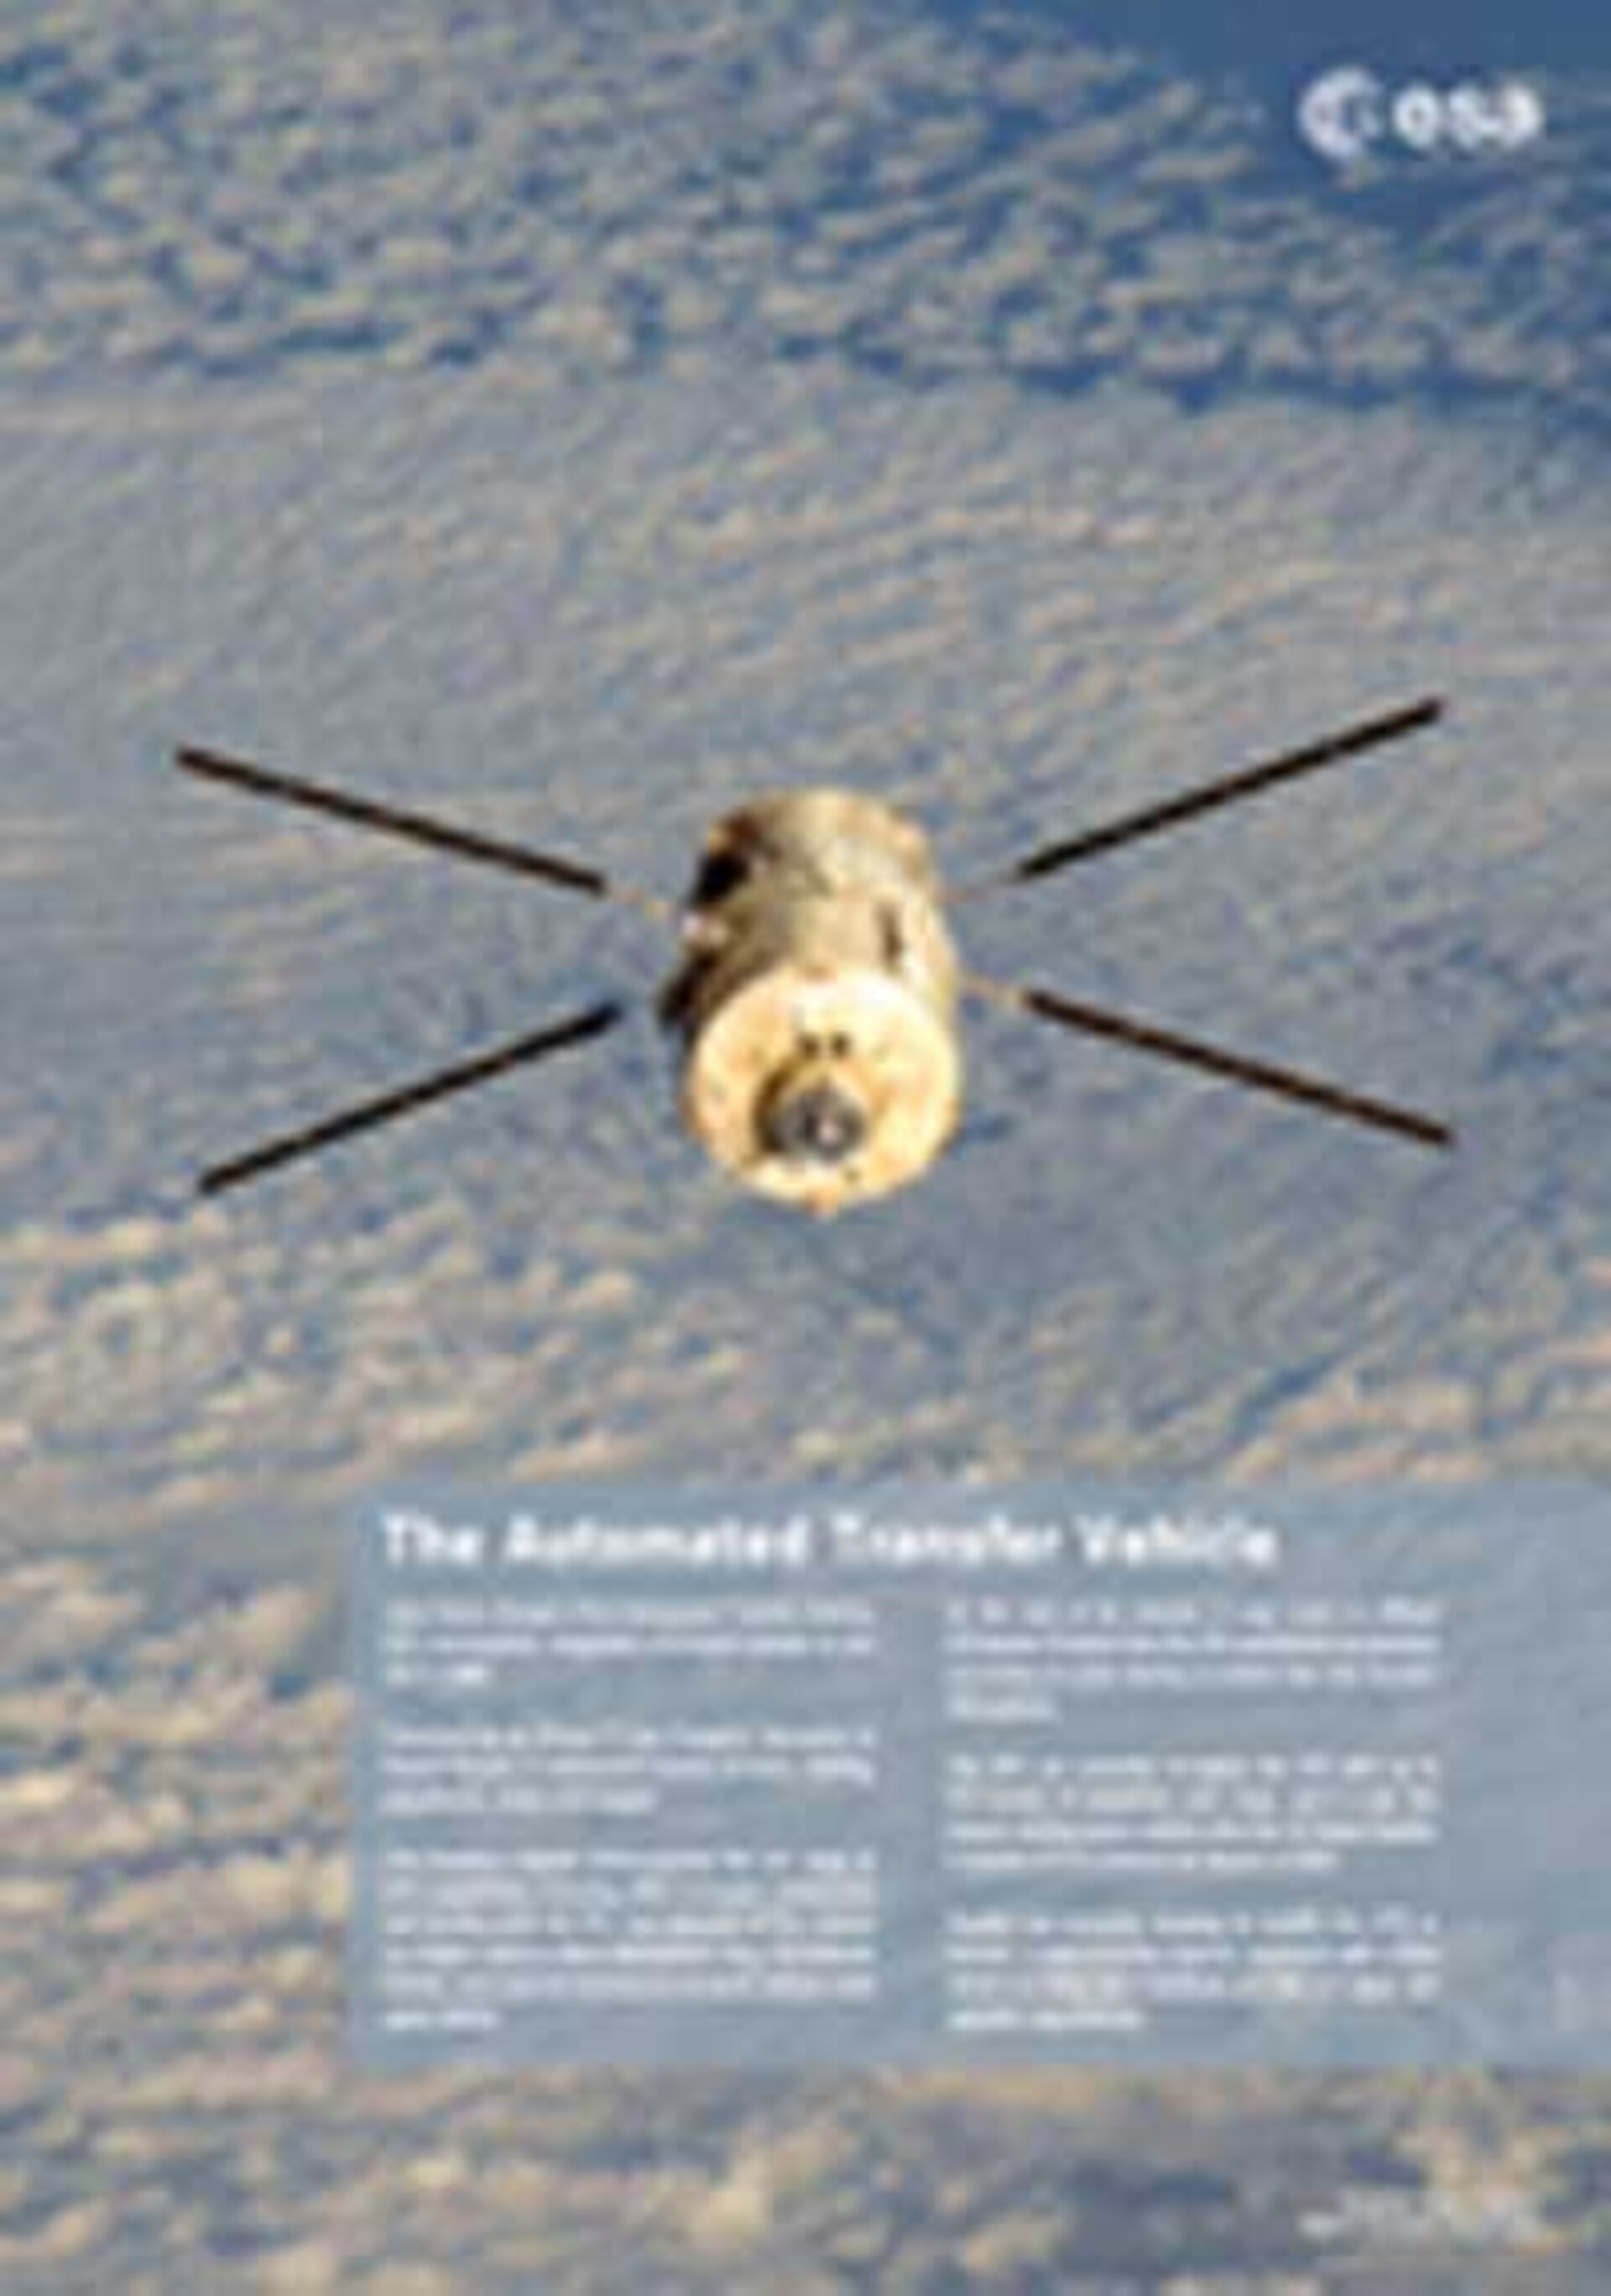 Poster - The Automated Transfer Vehicle